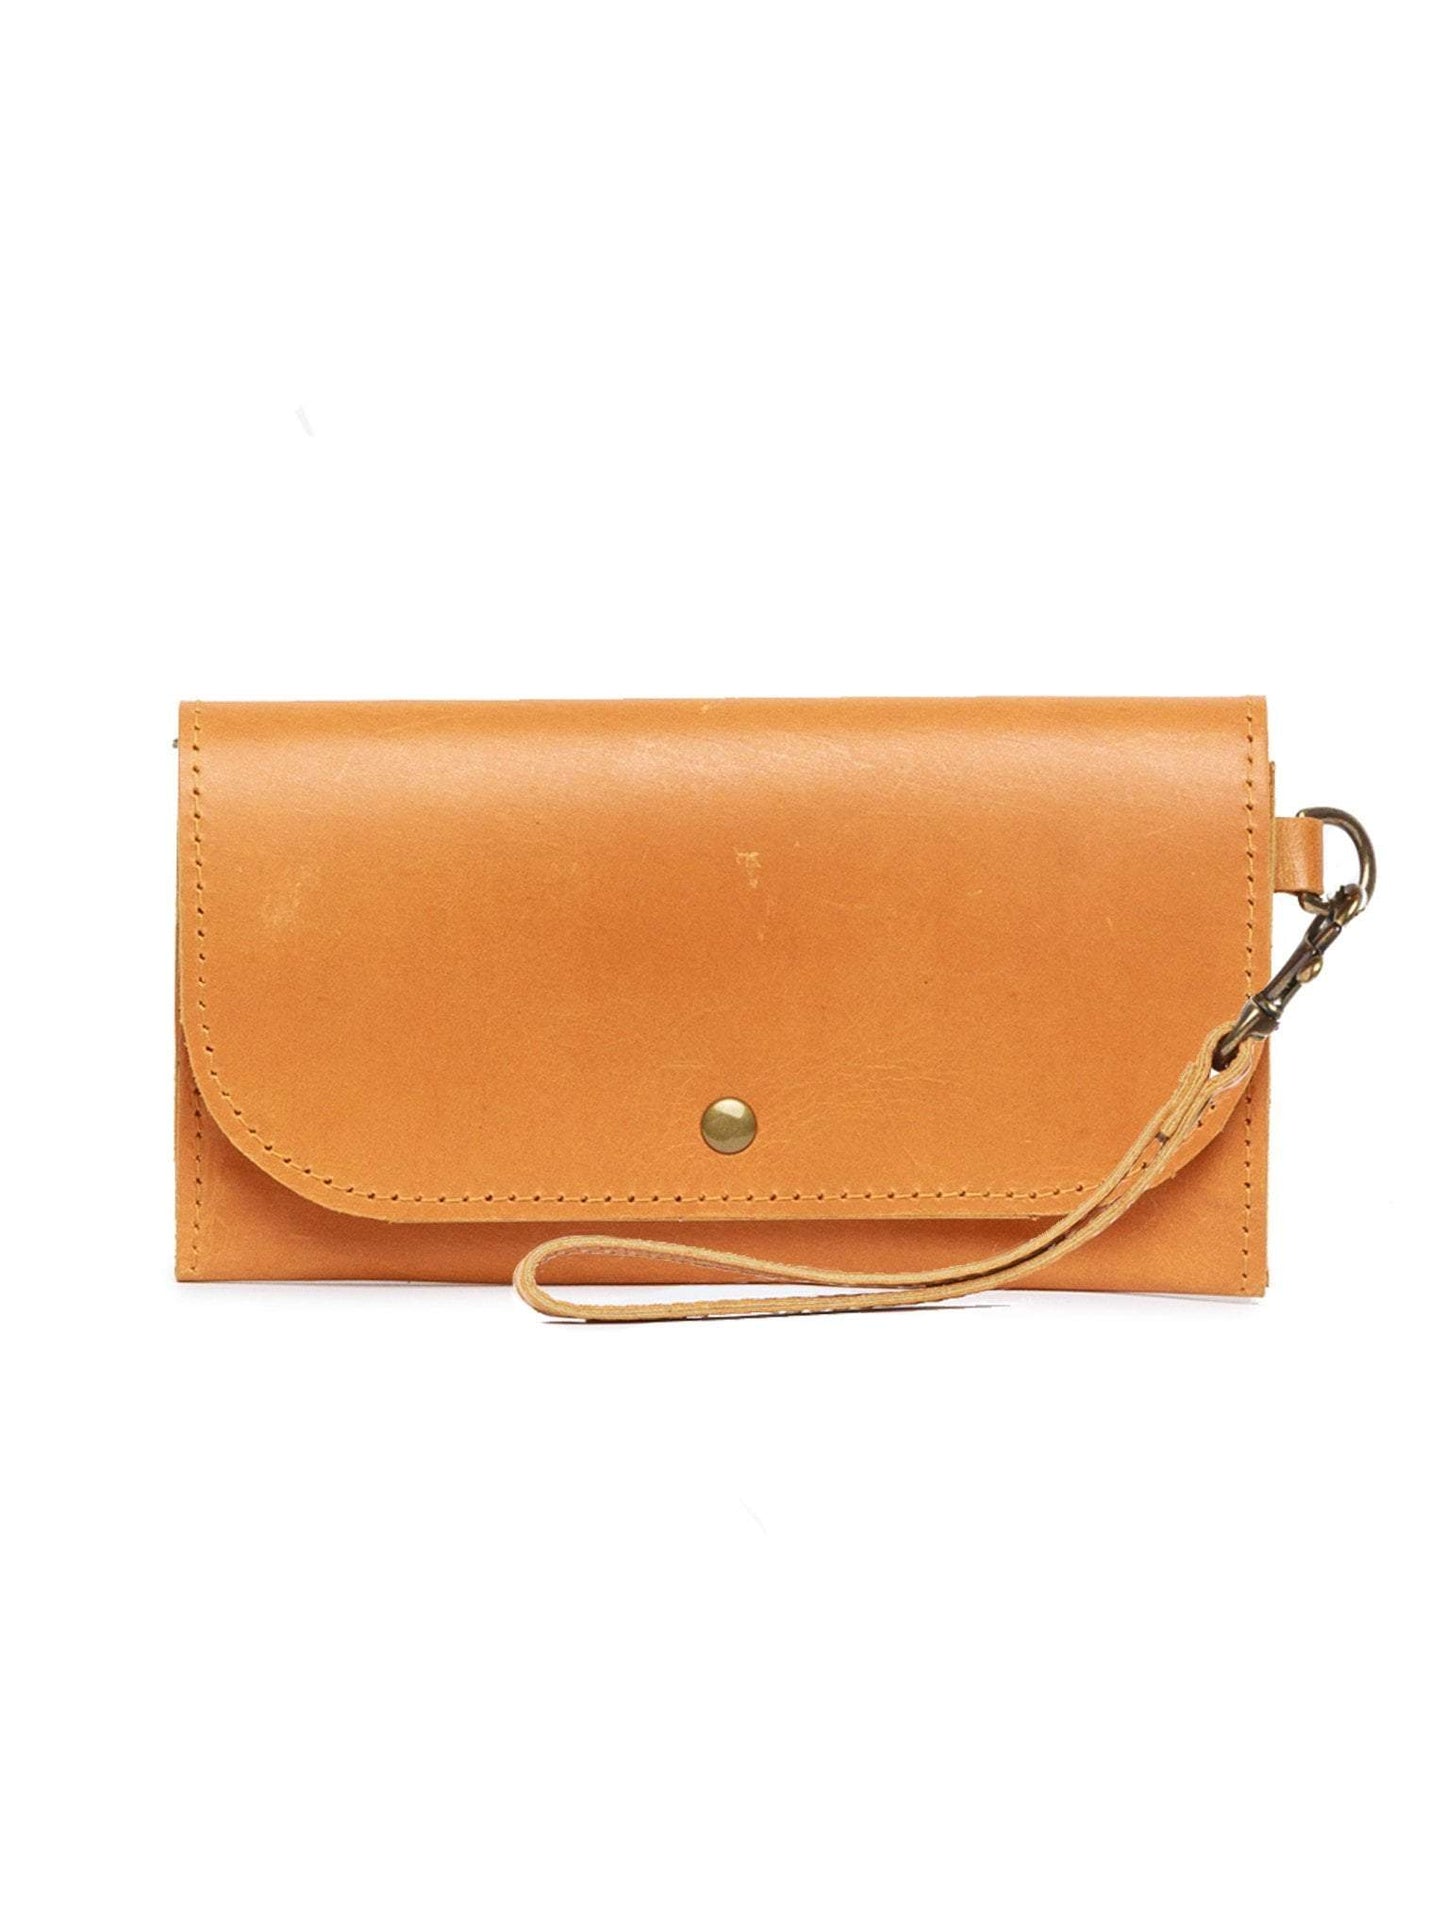 Able Mare Phone Wallet Wallets in Cognac at Wrapsody